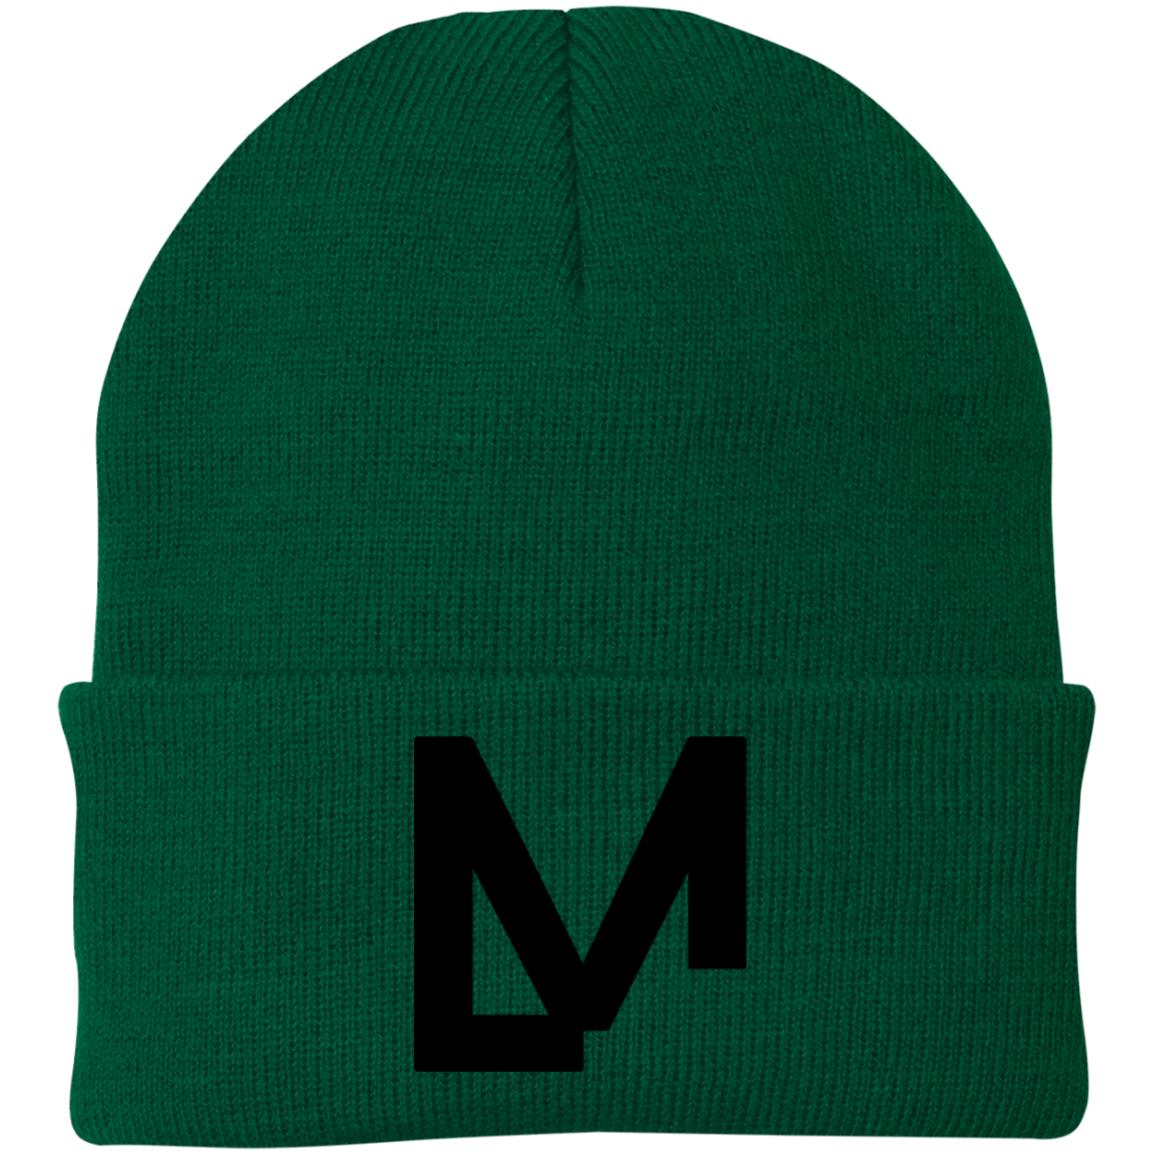 LM Embroidered Knit Cap 